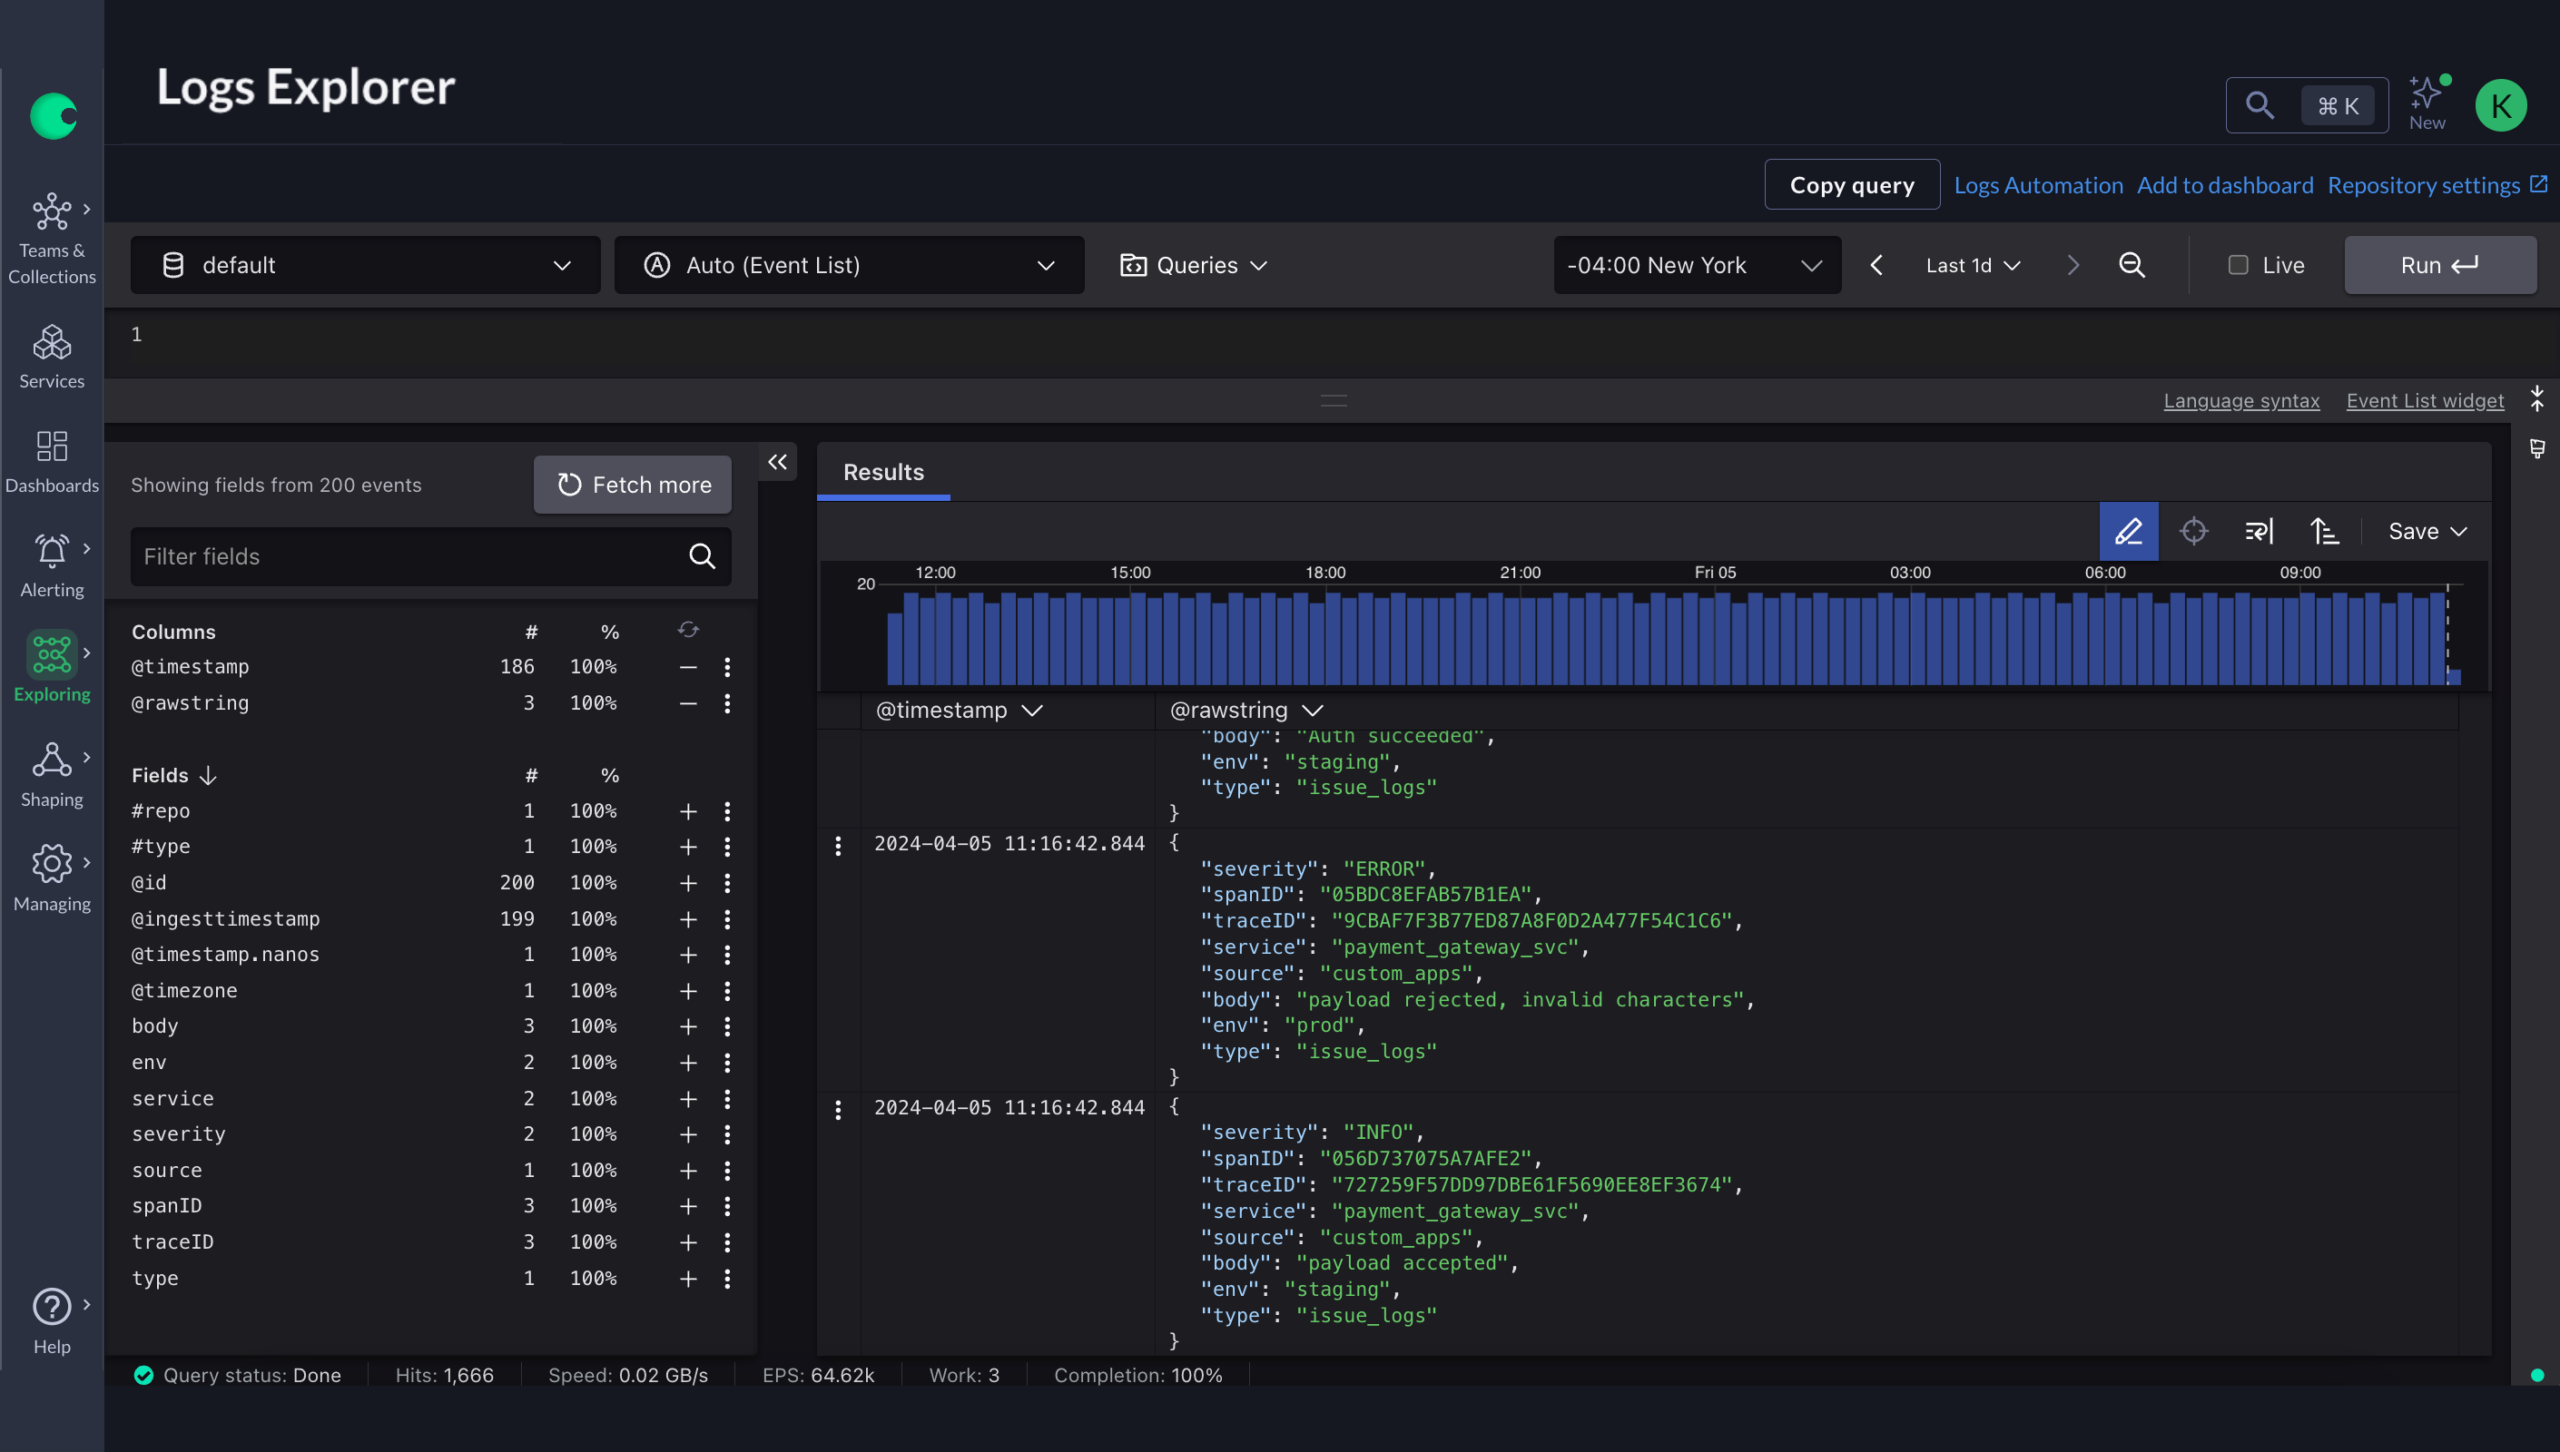 A screenshot of a logs explorer interface displaying a variety of log entries and structured logs data on a dark background.